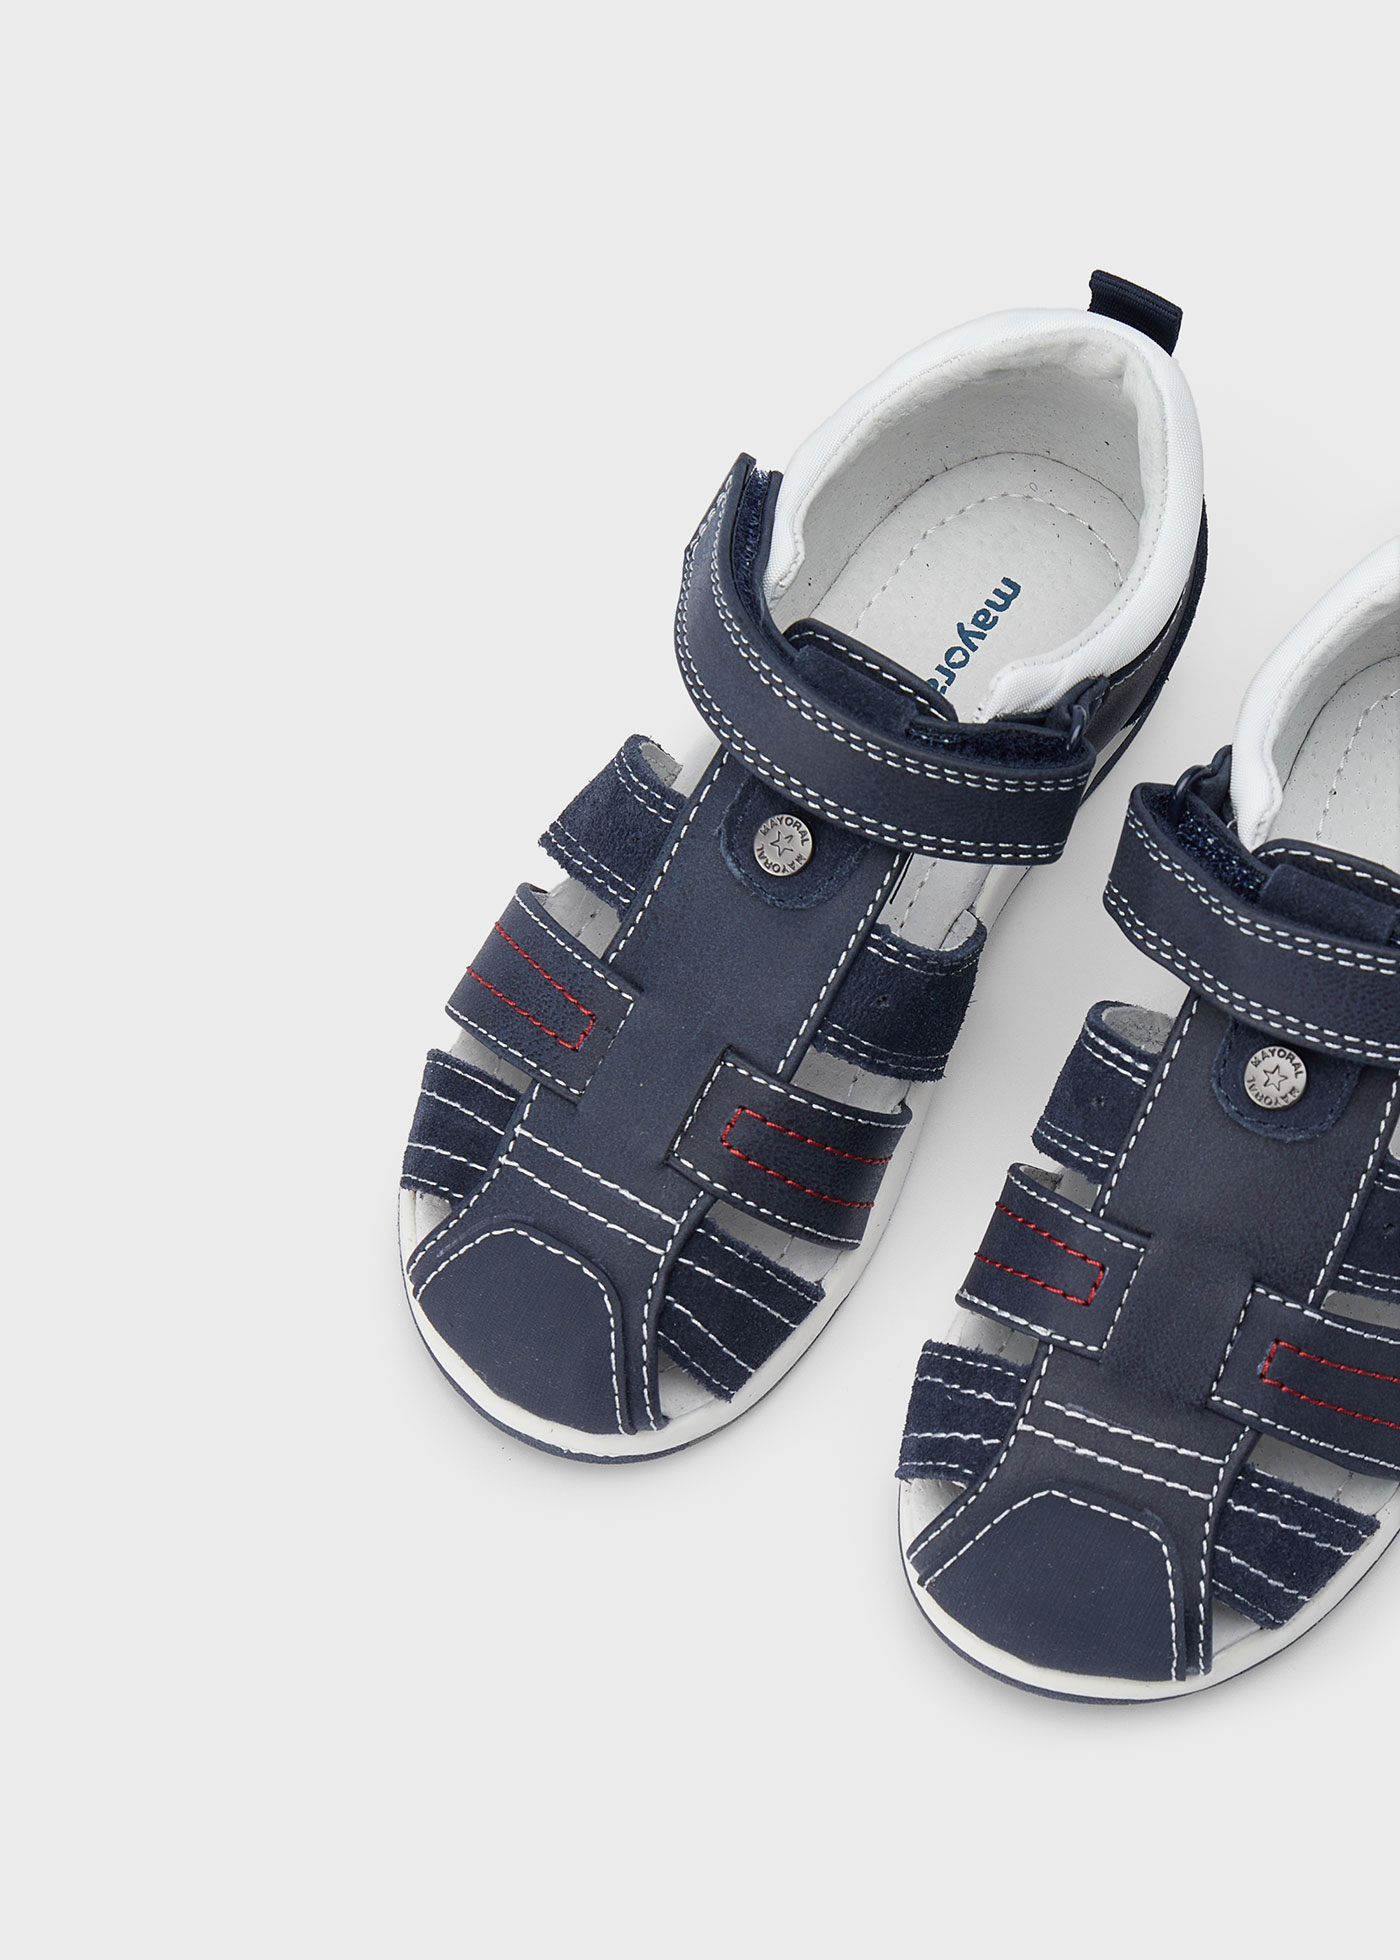 Boy Sandals Sustainable Leather